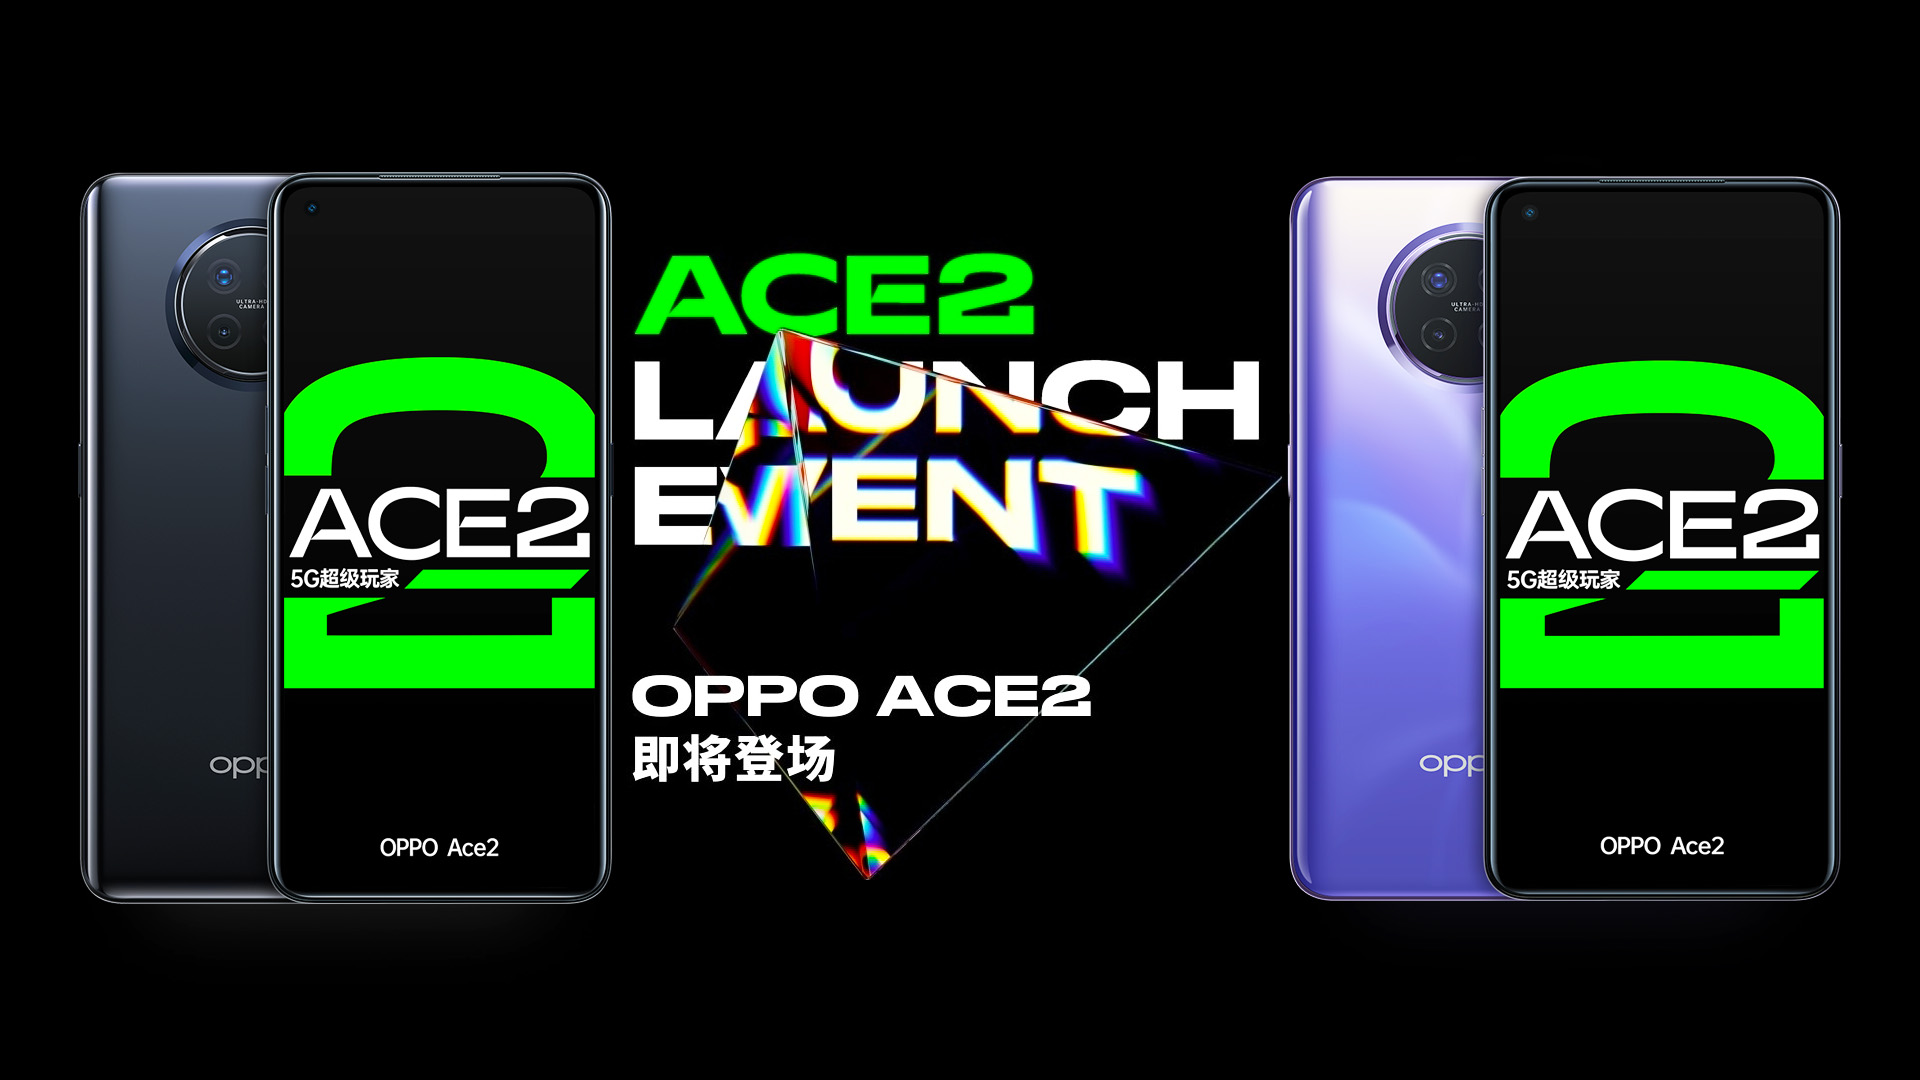 Oppo Reno Ace 2 officially shows its renders surface online